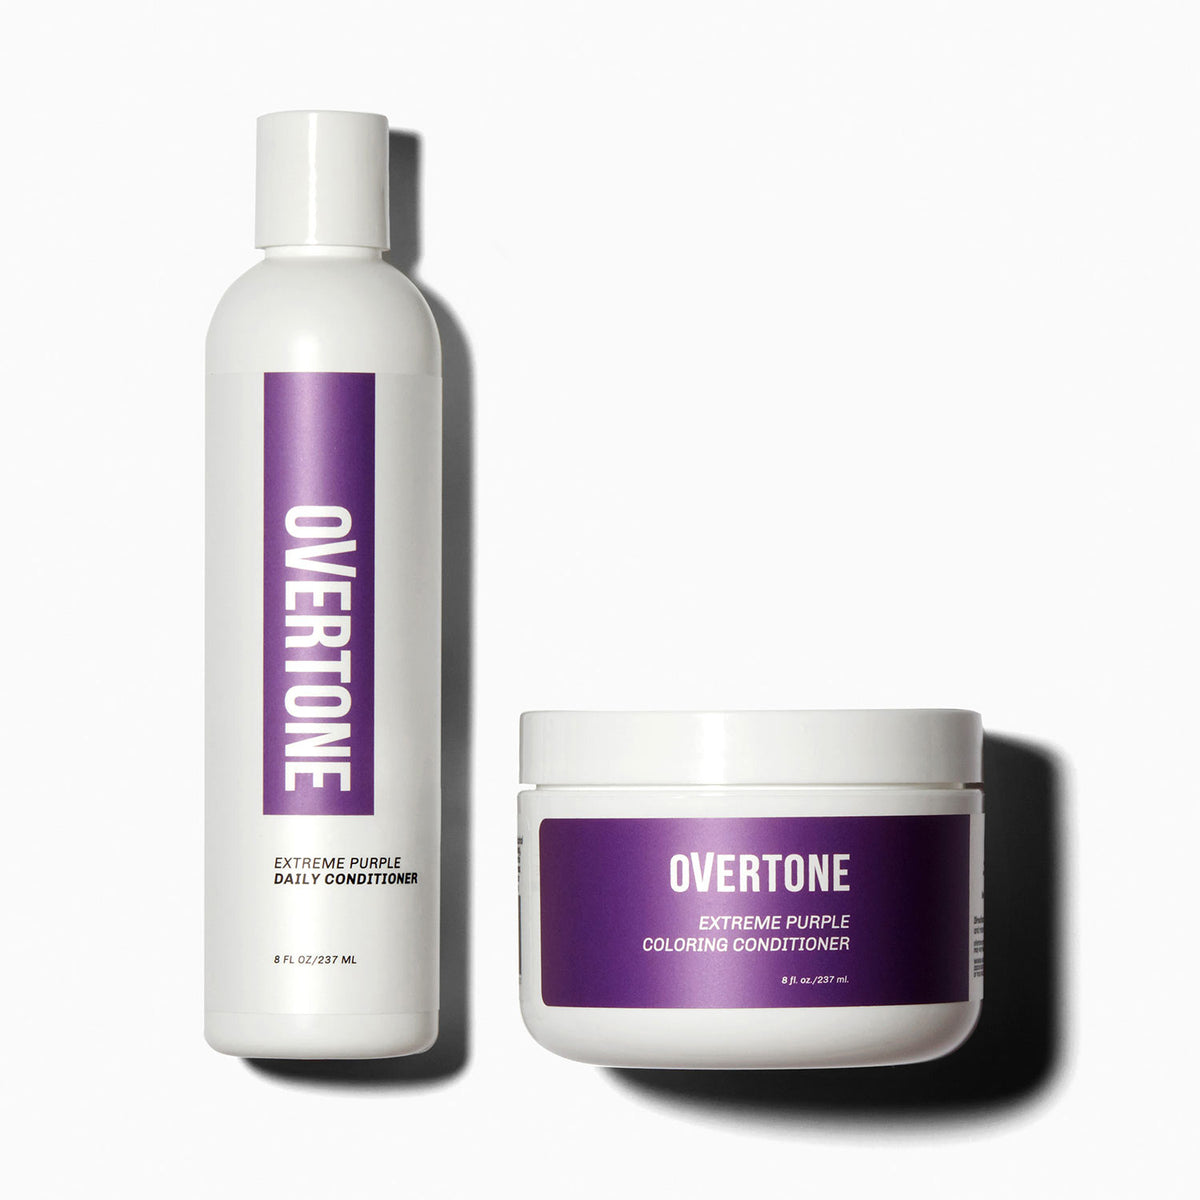 oVertone Extreme Purple Hair Coloring Conditioner and Daily Conditioner 